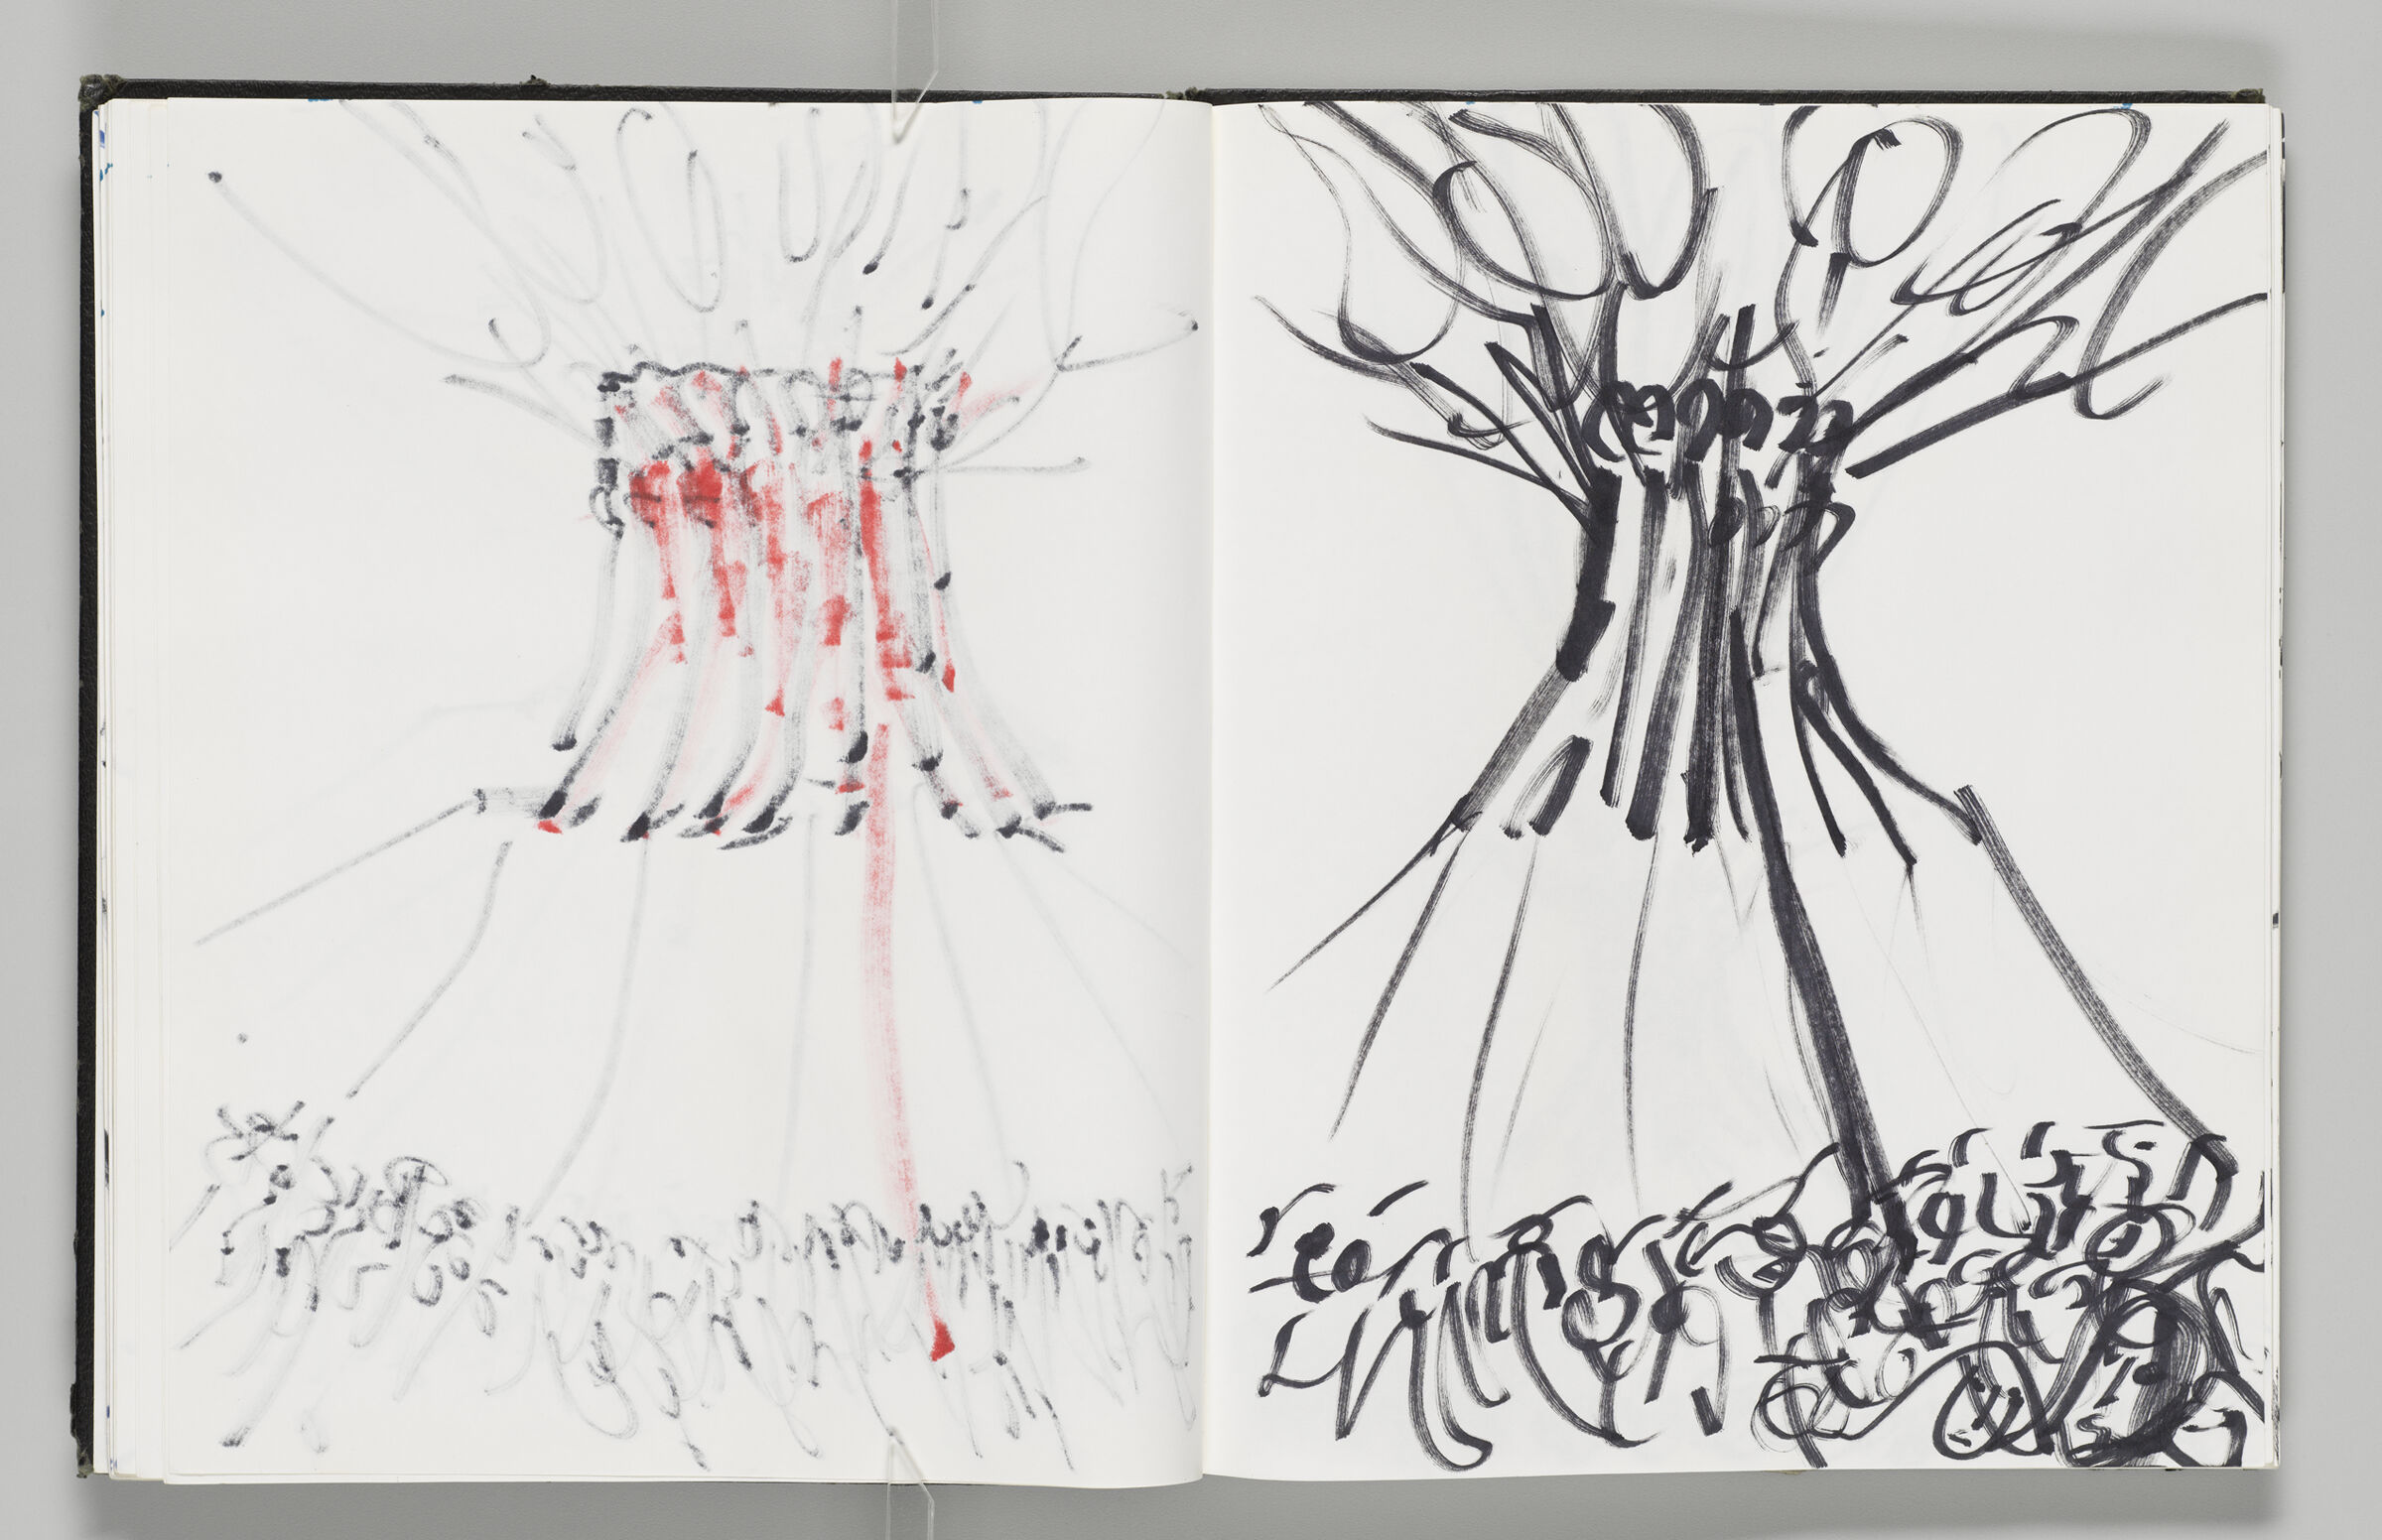 Untitled (Bleed-Through Of Previous Page, Left Page); Untitled (Inflatable In Sky With Crowd, Right Page)